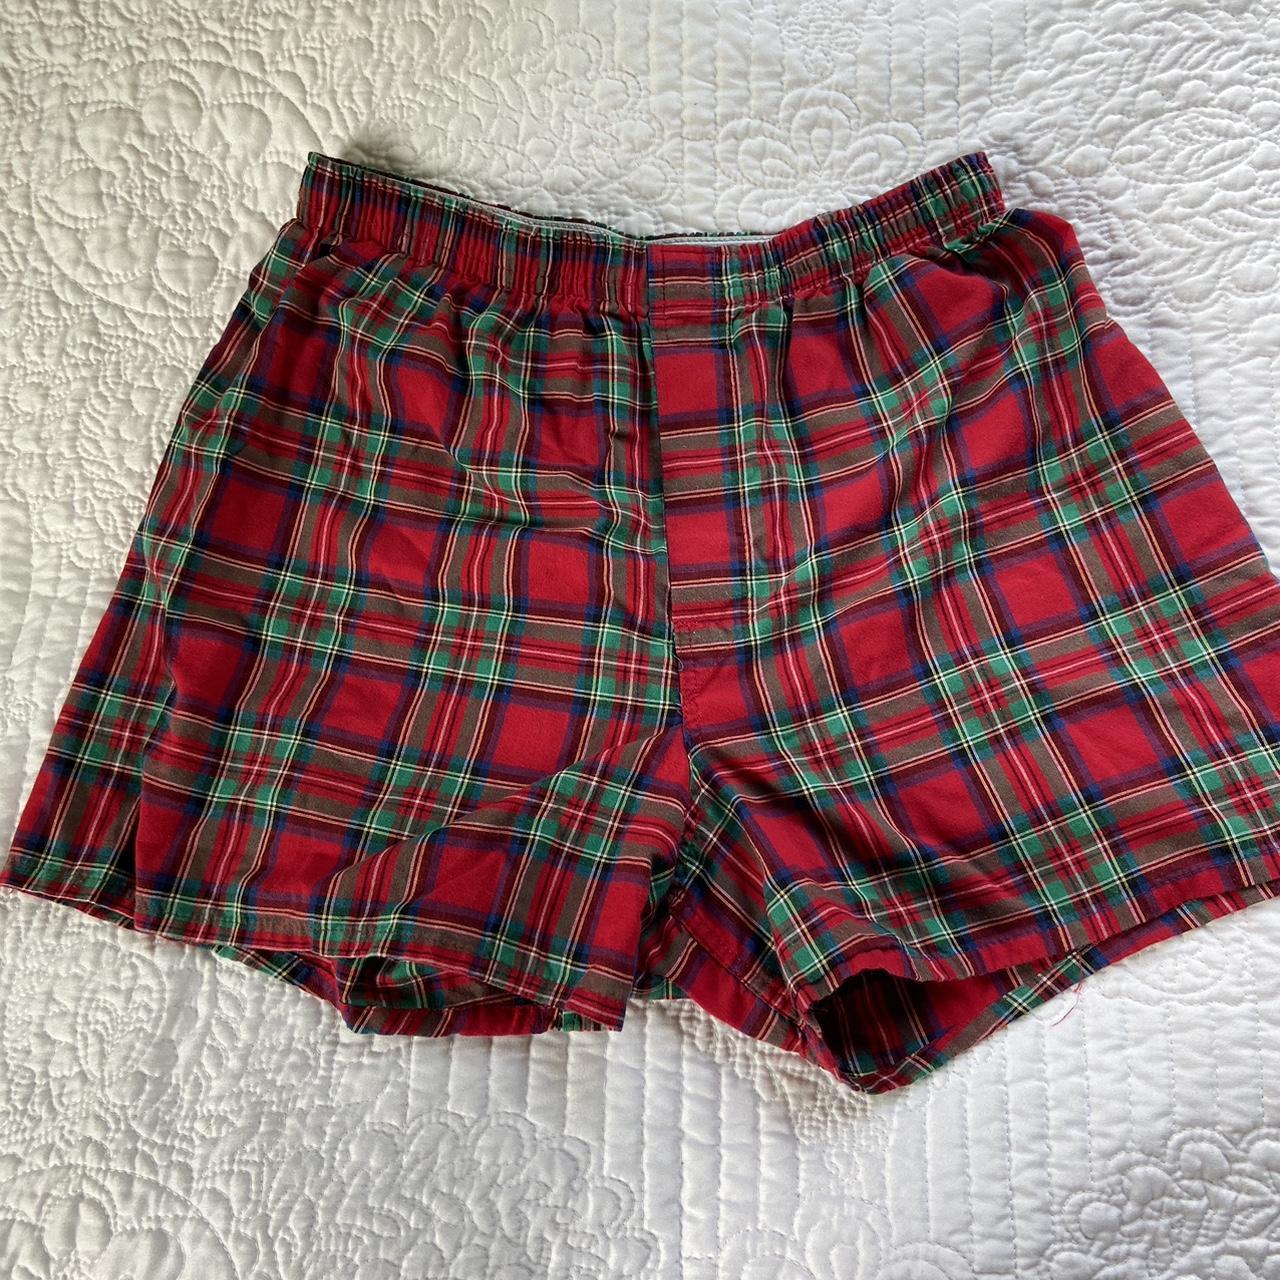 hanes cute boxer shorts - could wear with waistband - Depop